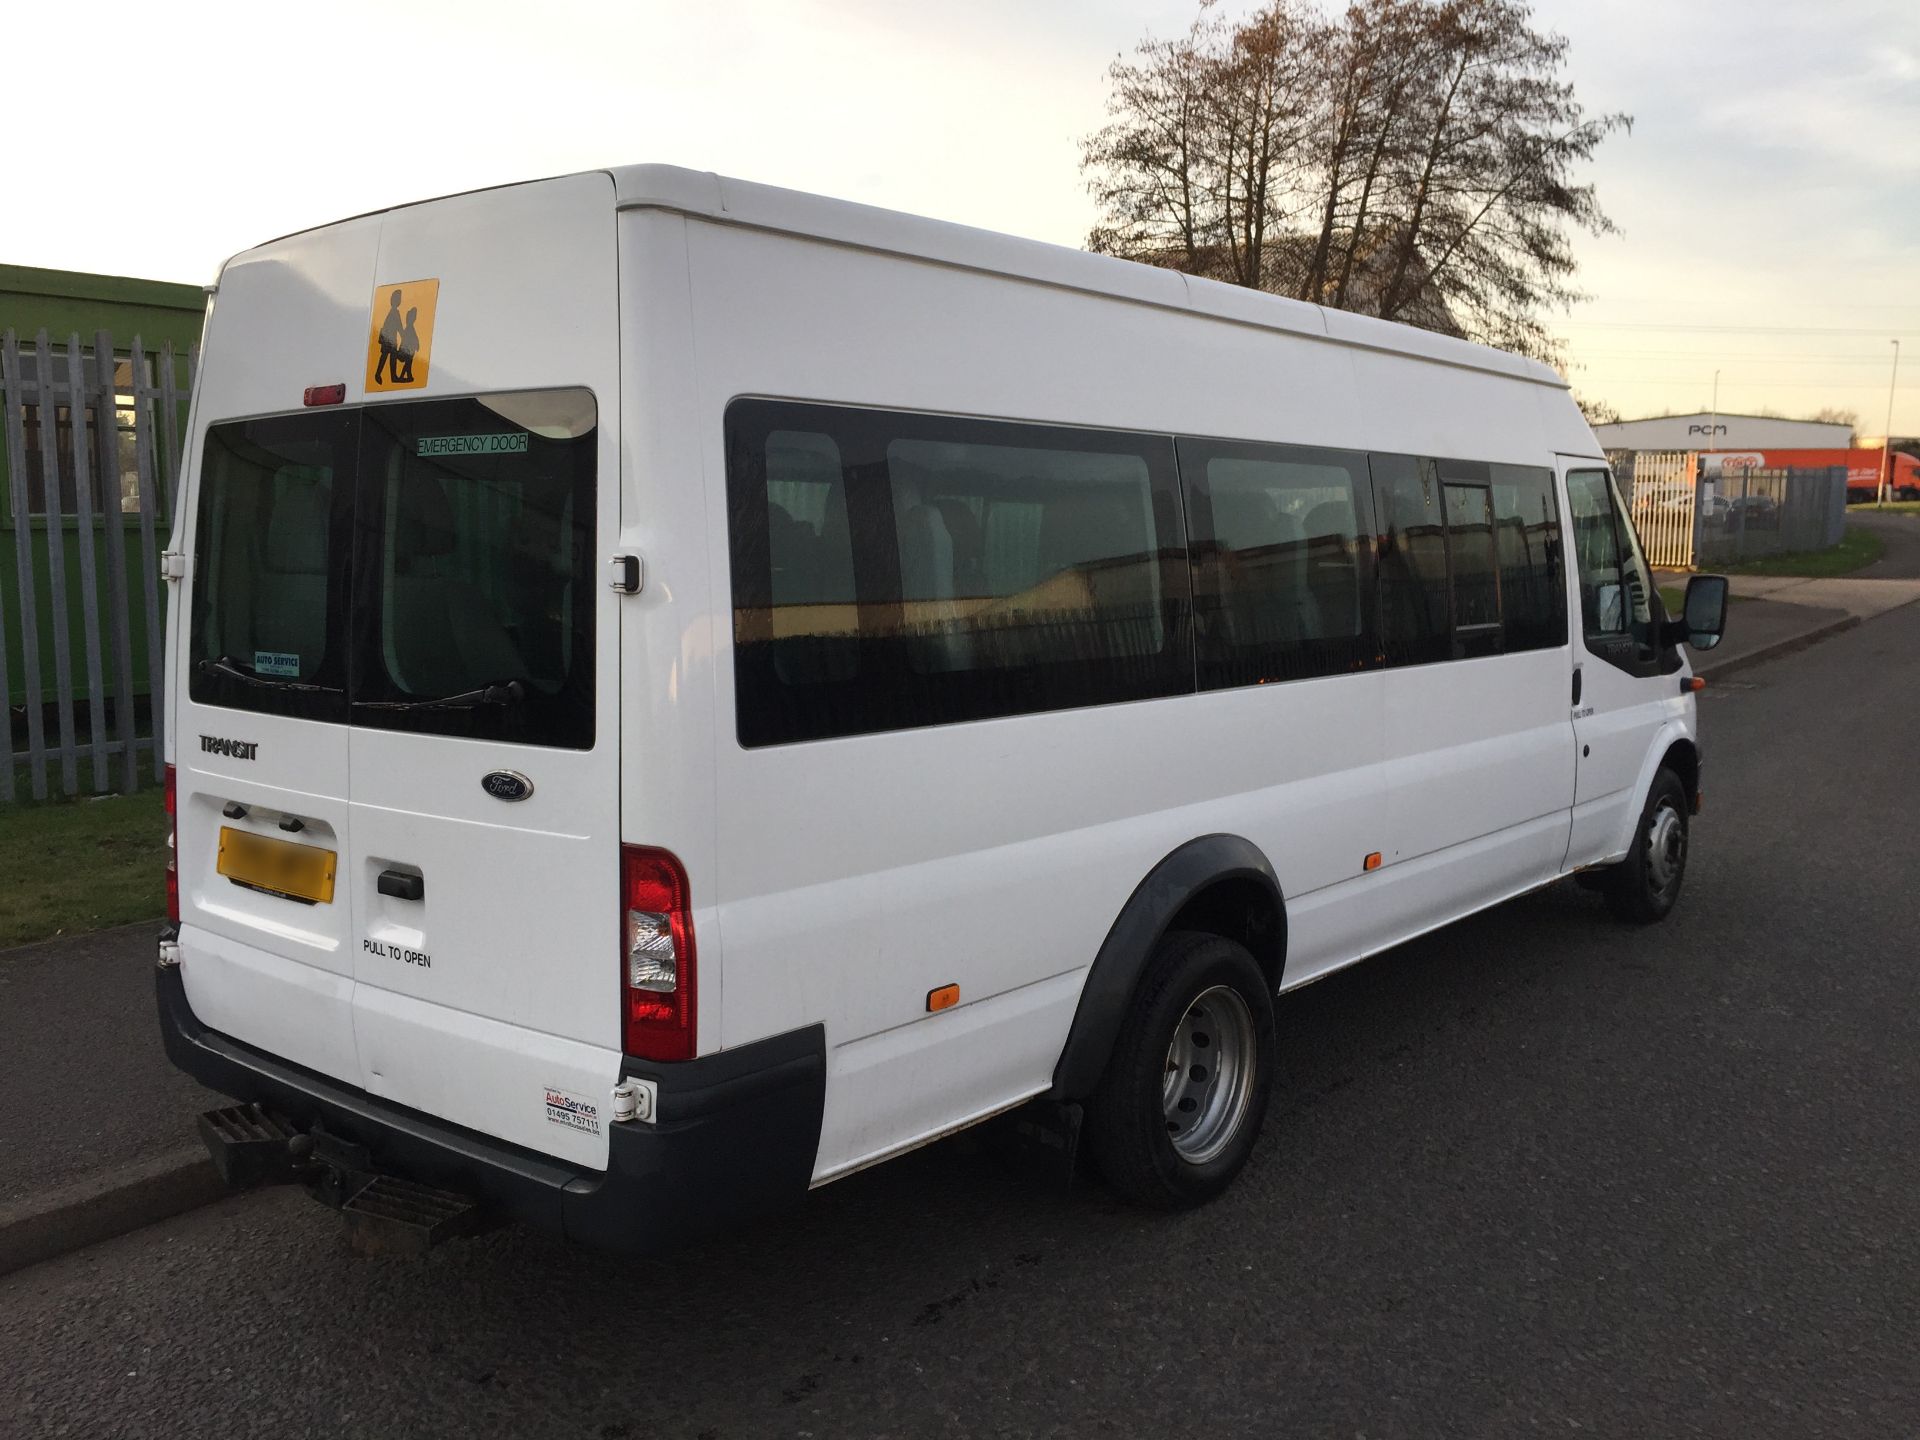 2010 Ford Transit 430 EL 17 Seater Minibus C.O.I.F 135 PS 2.4 - CL505 - Location: Corby, - Image 2 of 10